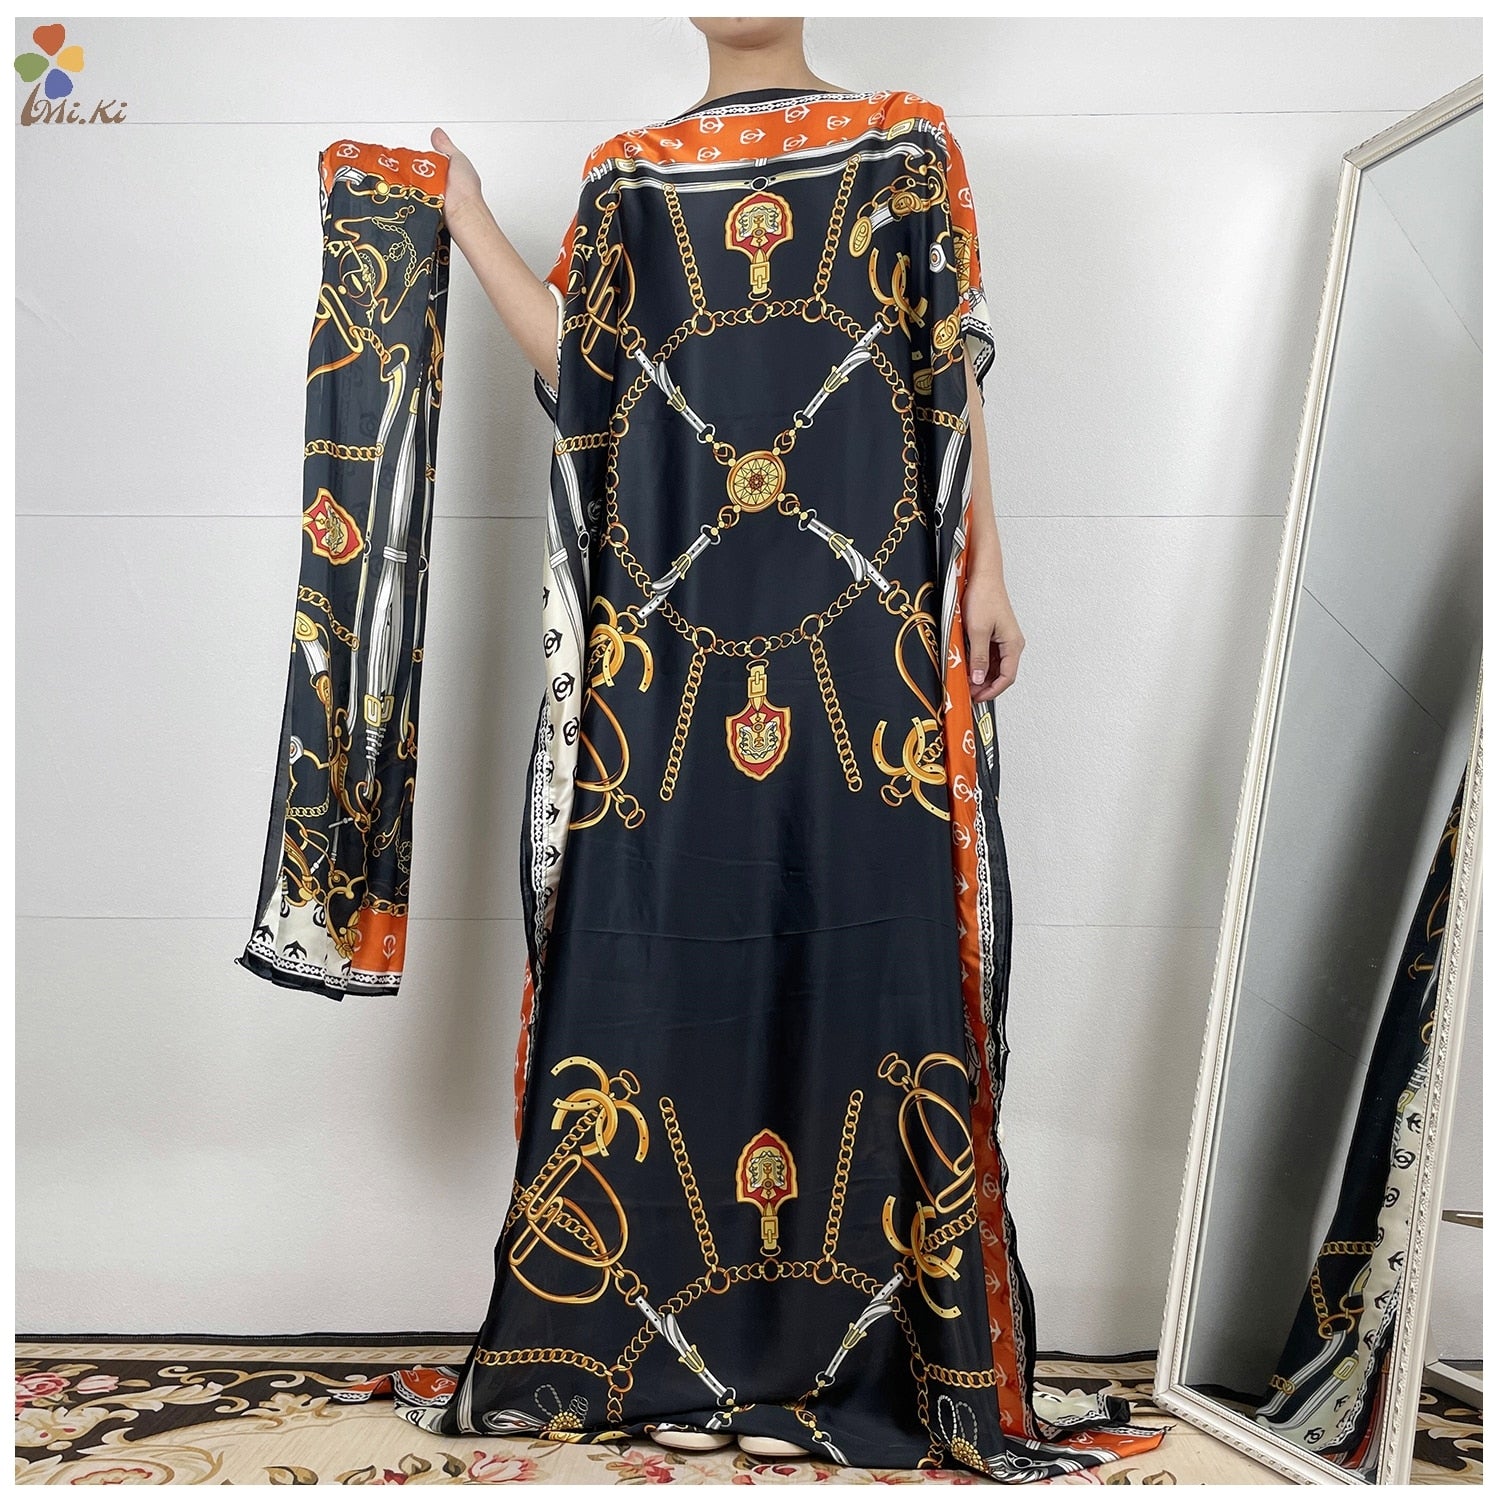 2PC Set of Fashionable Dashiki Robes - Printed Loose Dresses with Luxurious Silk Fabric for Women - Flexi Africa - Flexi Africa offers Free Delivery Worldwide - Vibrant African traditional clothing showcasing bold prints and intricate designs